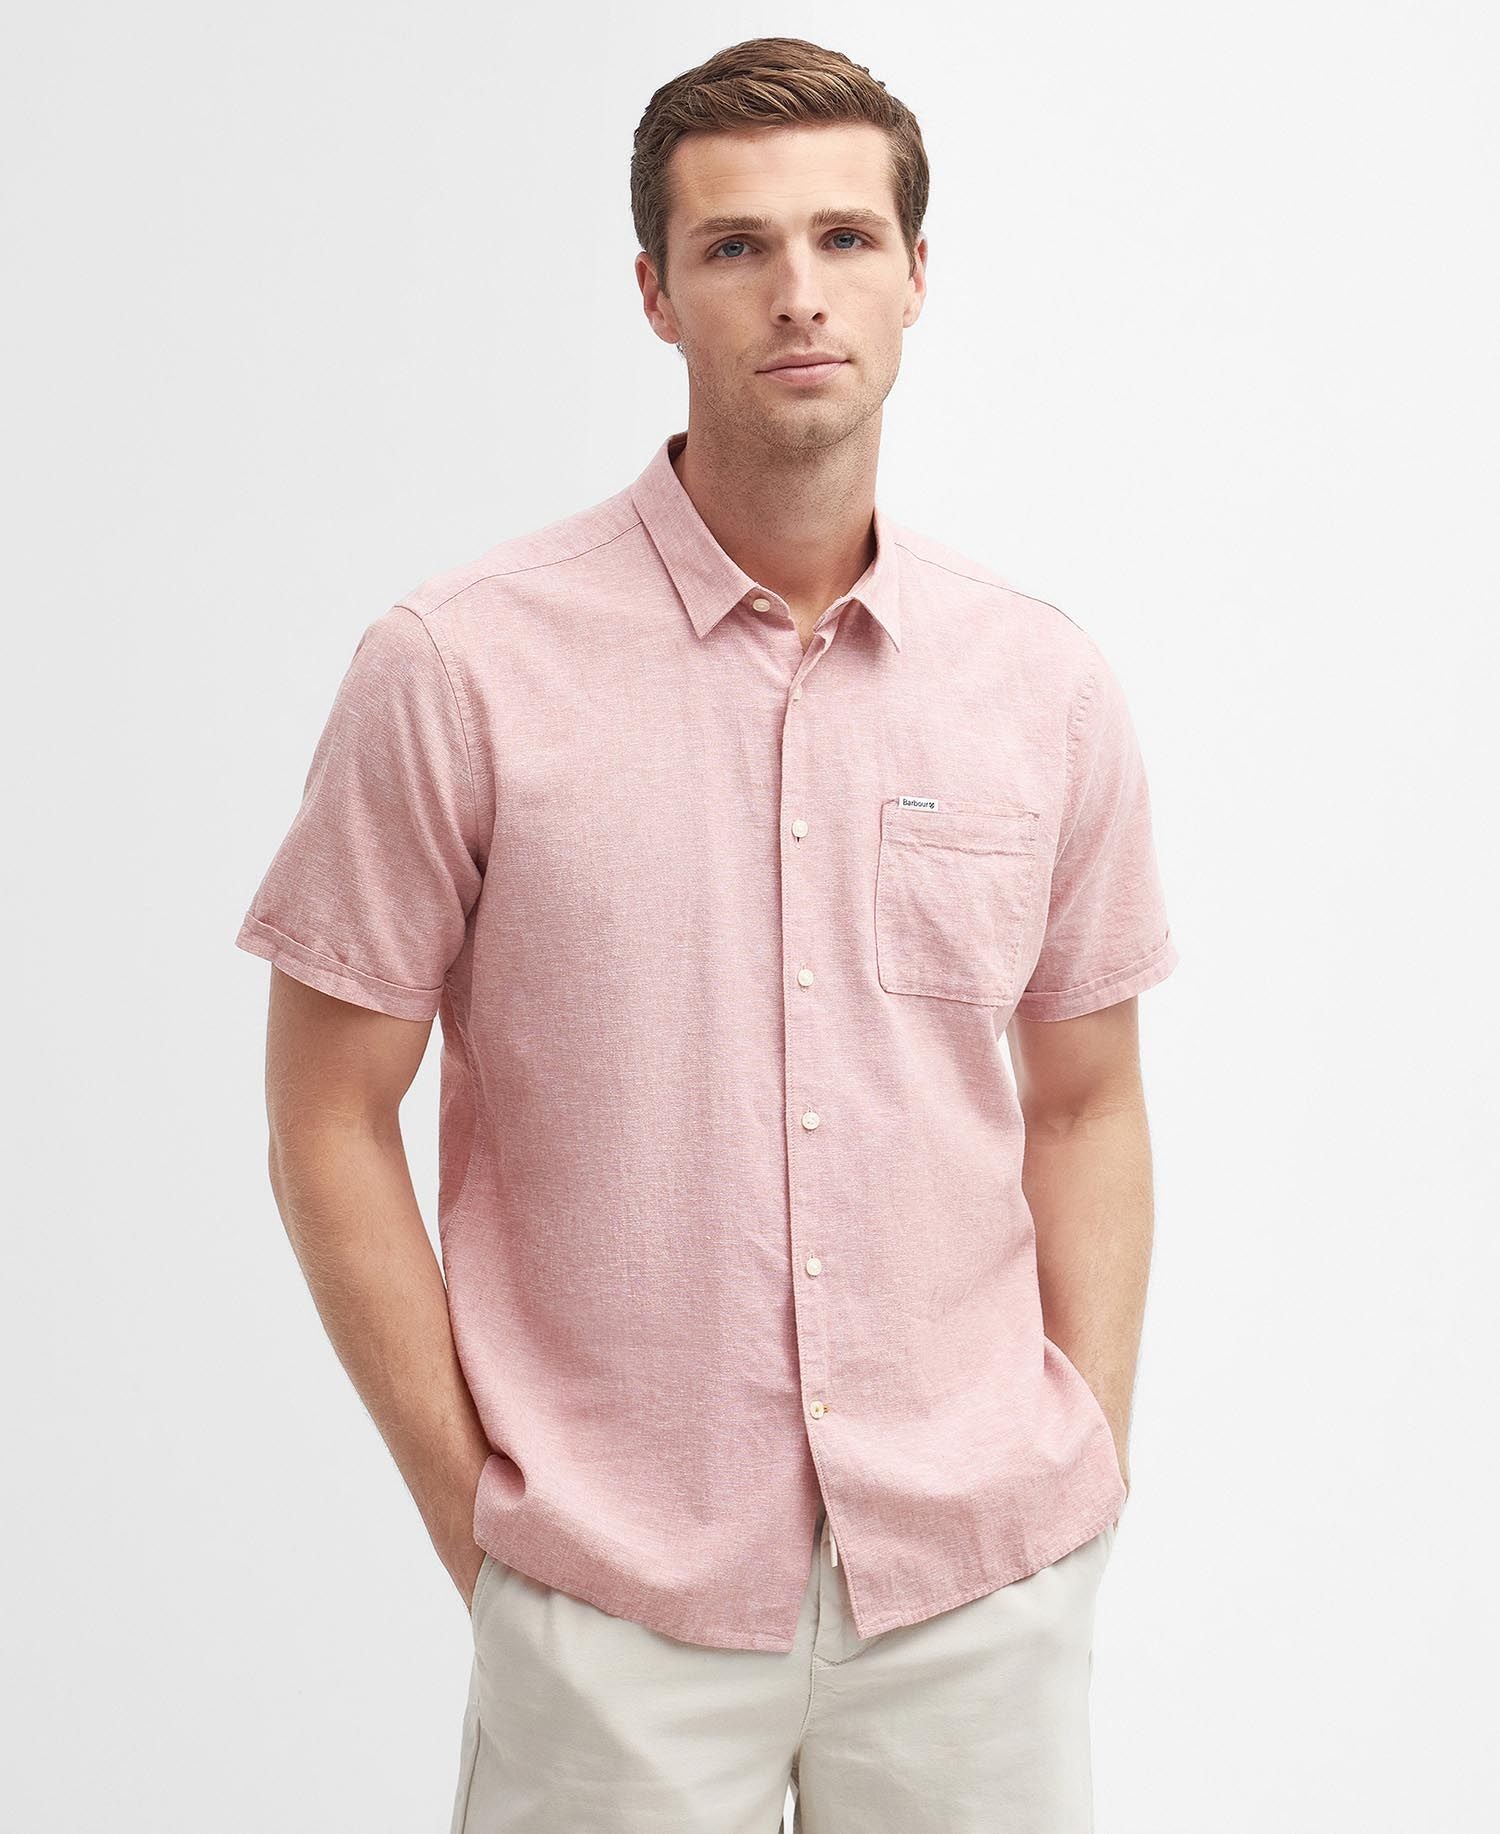 Barbour Nelson SS Summer Shirt PI55 Pink Clay